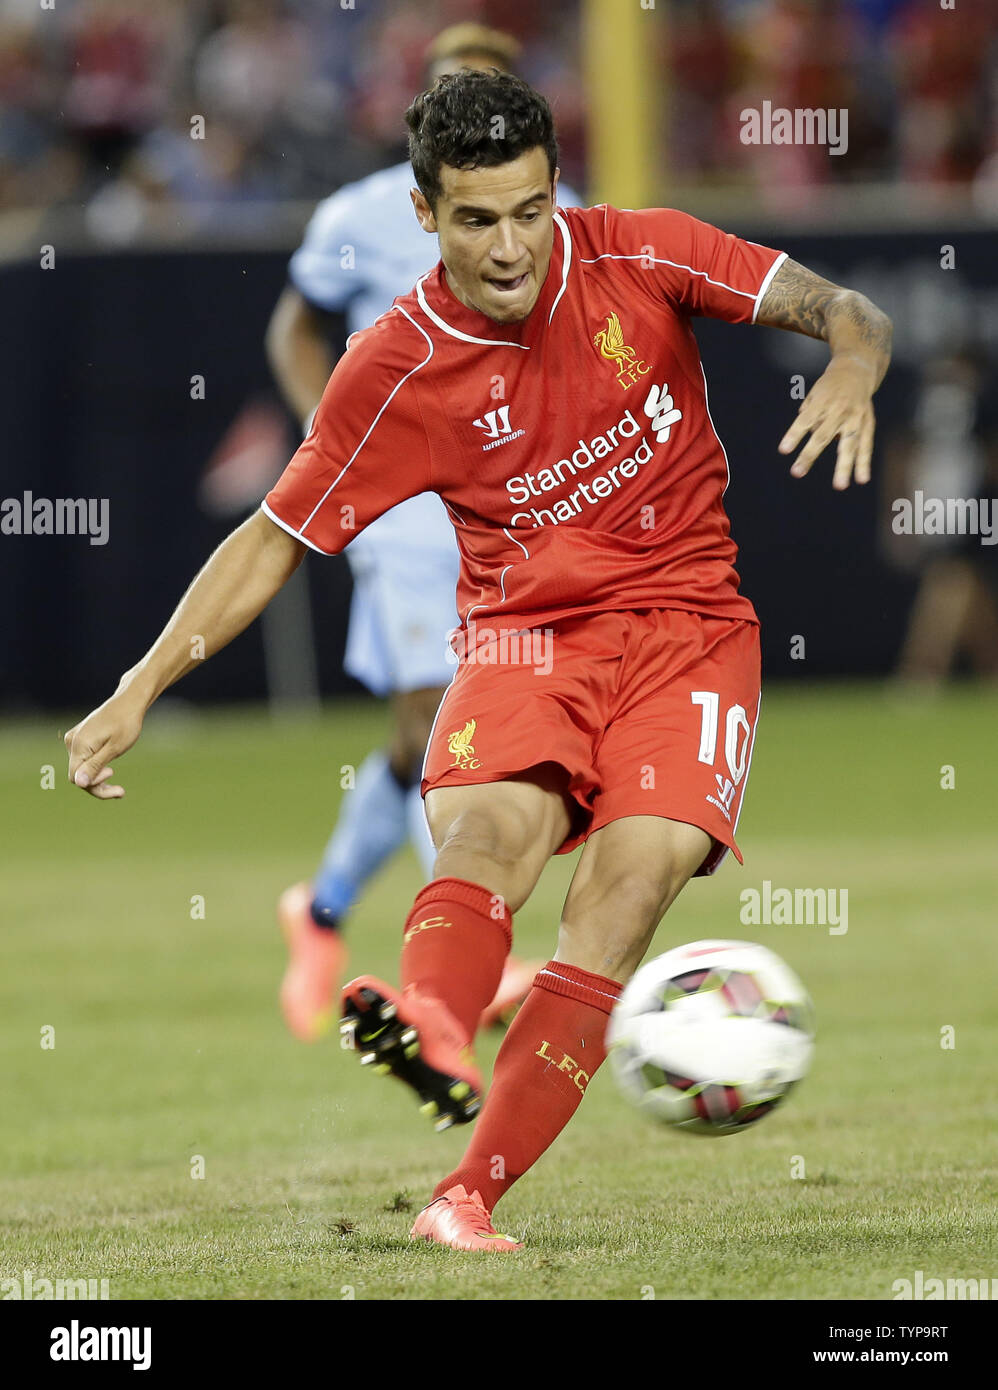 Liverpool FC Philippe Coutinho kicks the ball in the second hal against  Manchester City at the Guinness International Champions Cup at Yankee  Stadium in New York City on July 30, 2014. The